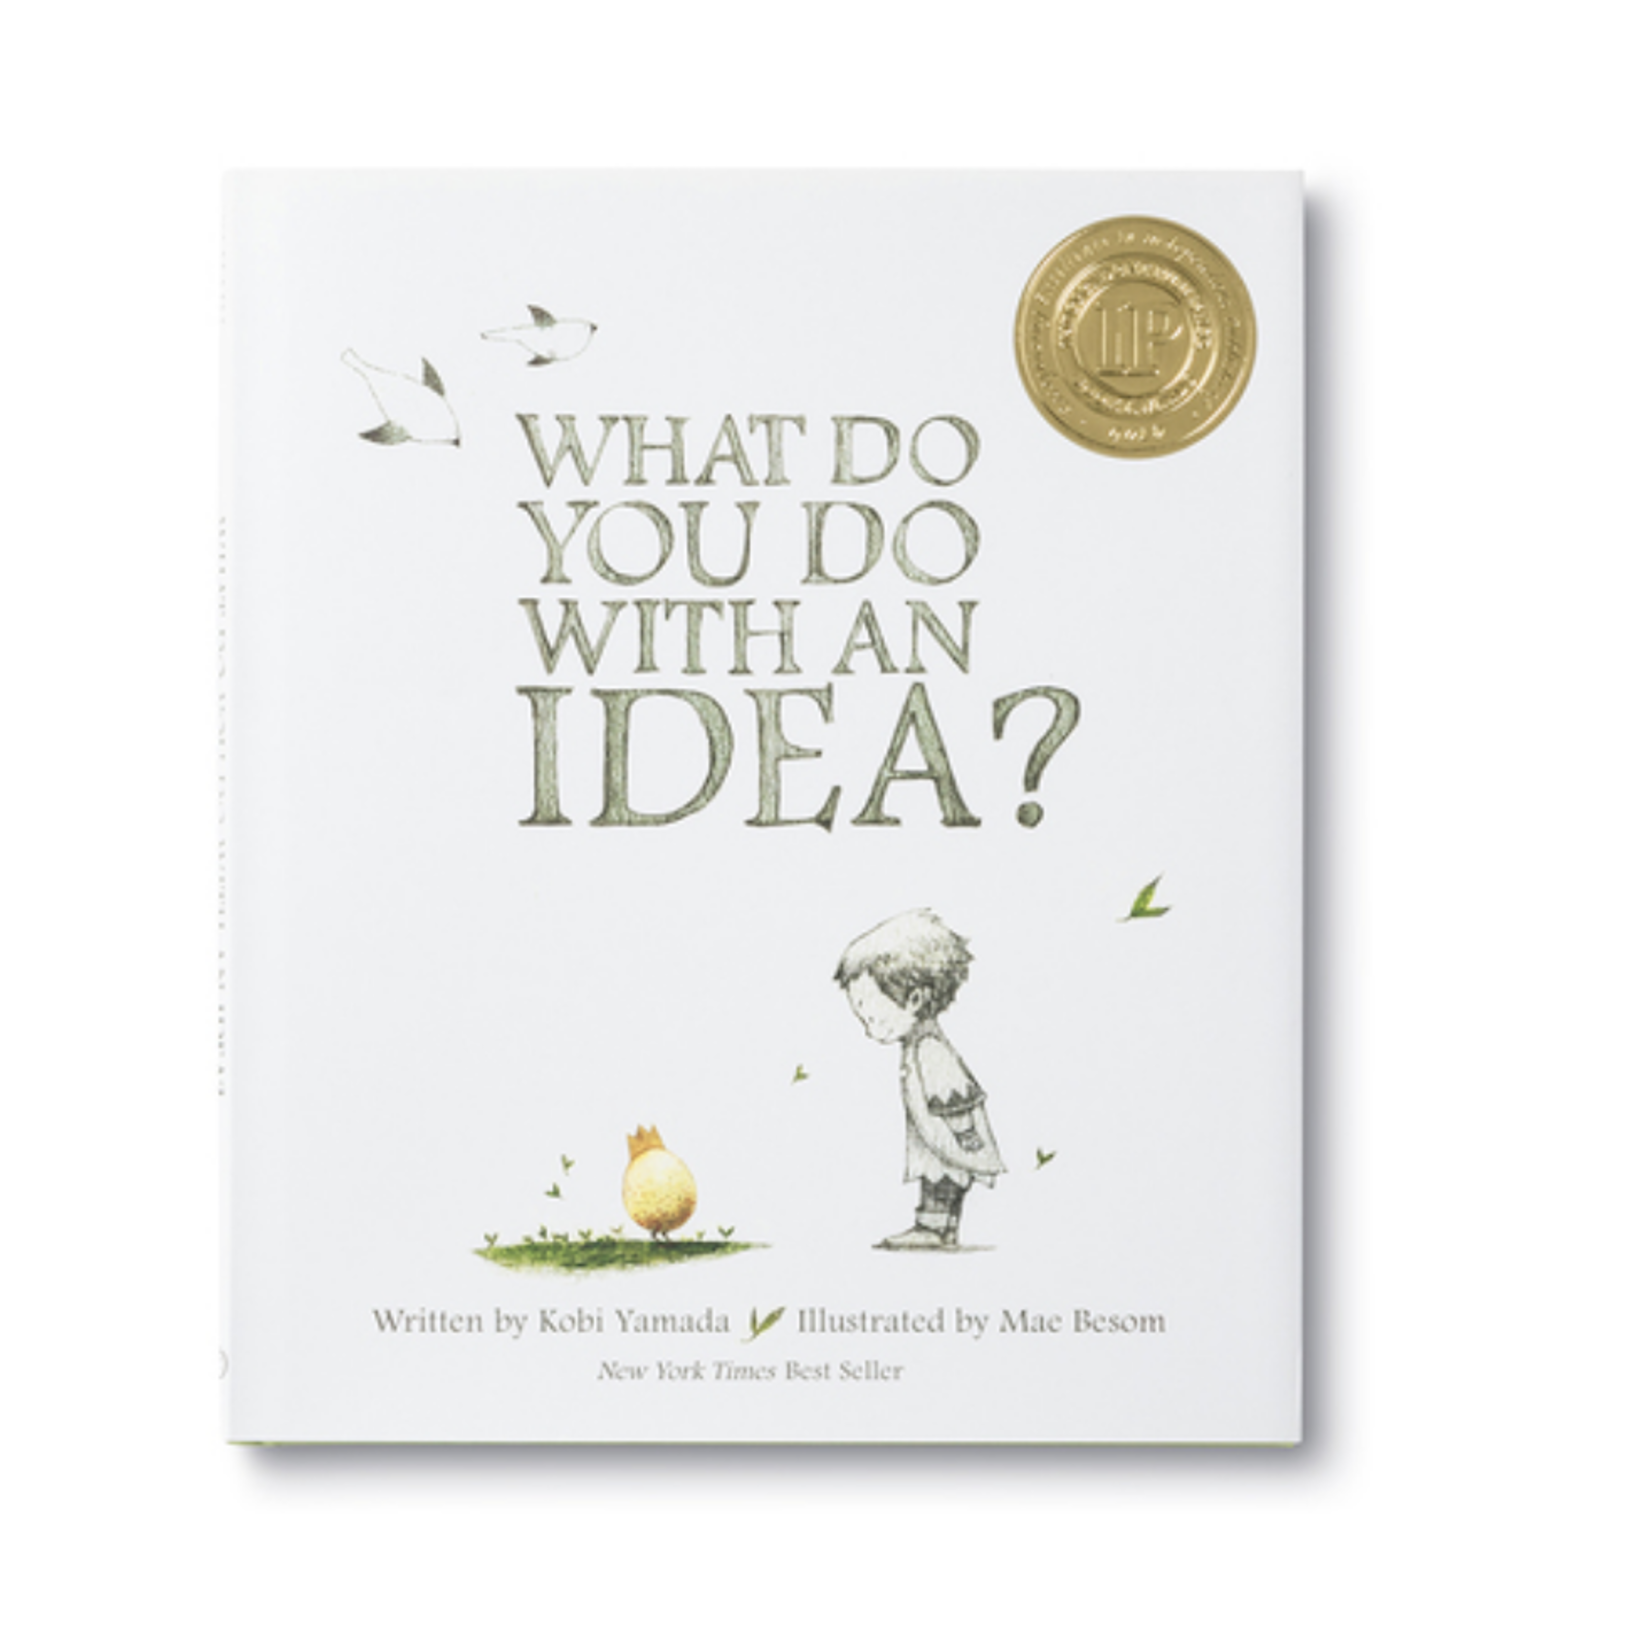 Compendium - Greeting Cards Compendium - What Do You Do With An Idea?